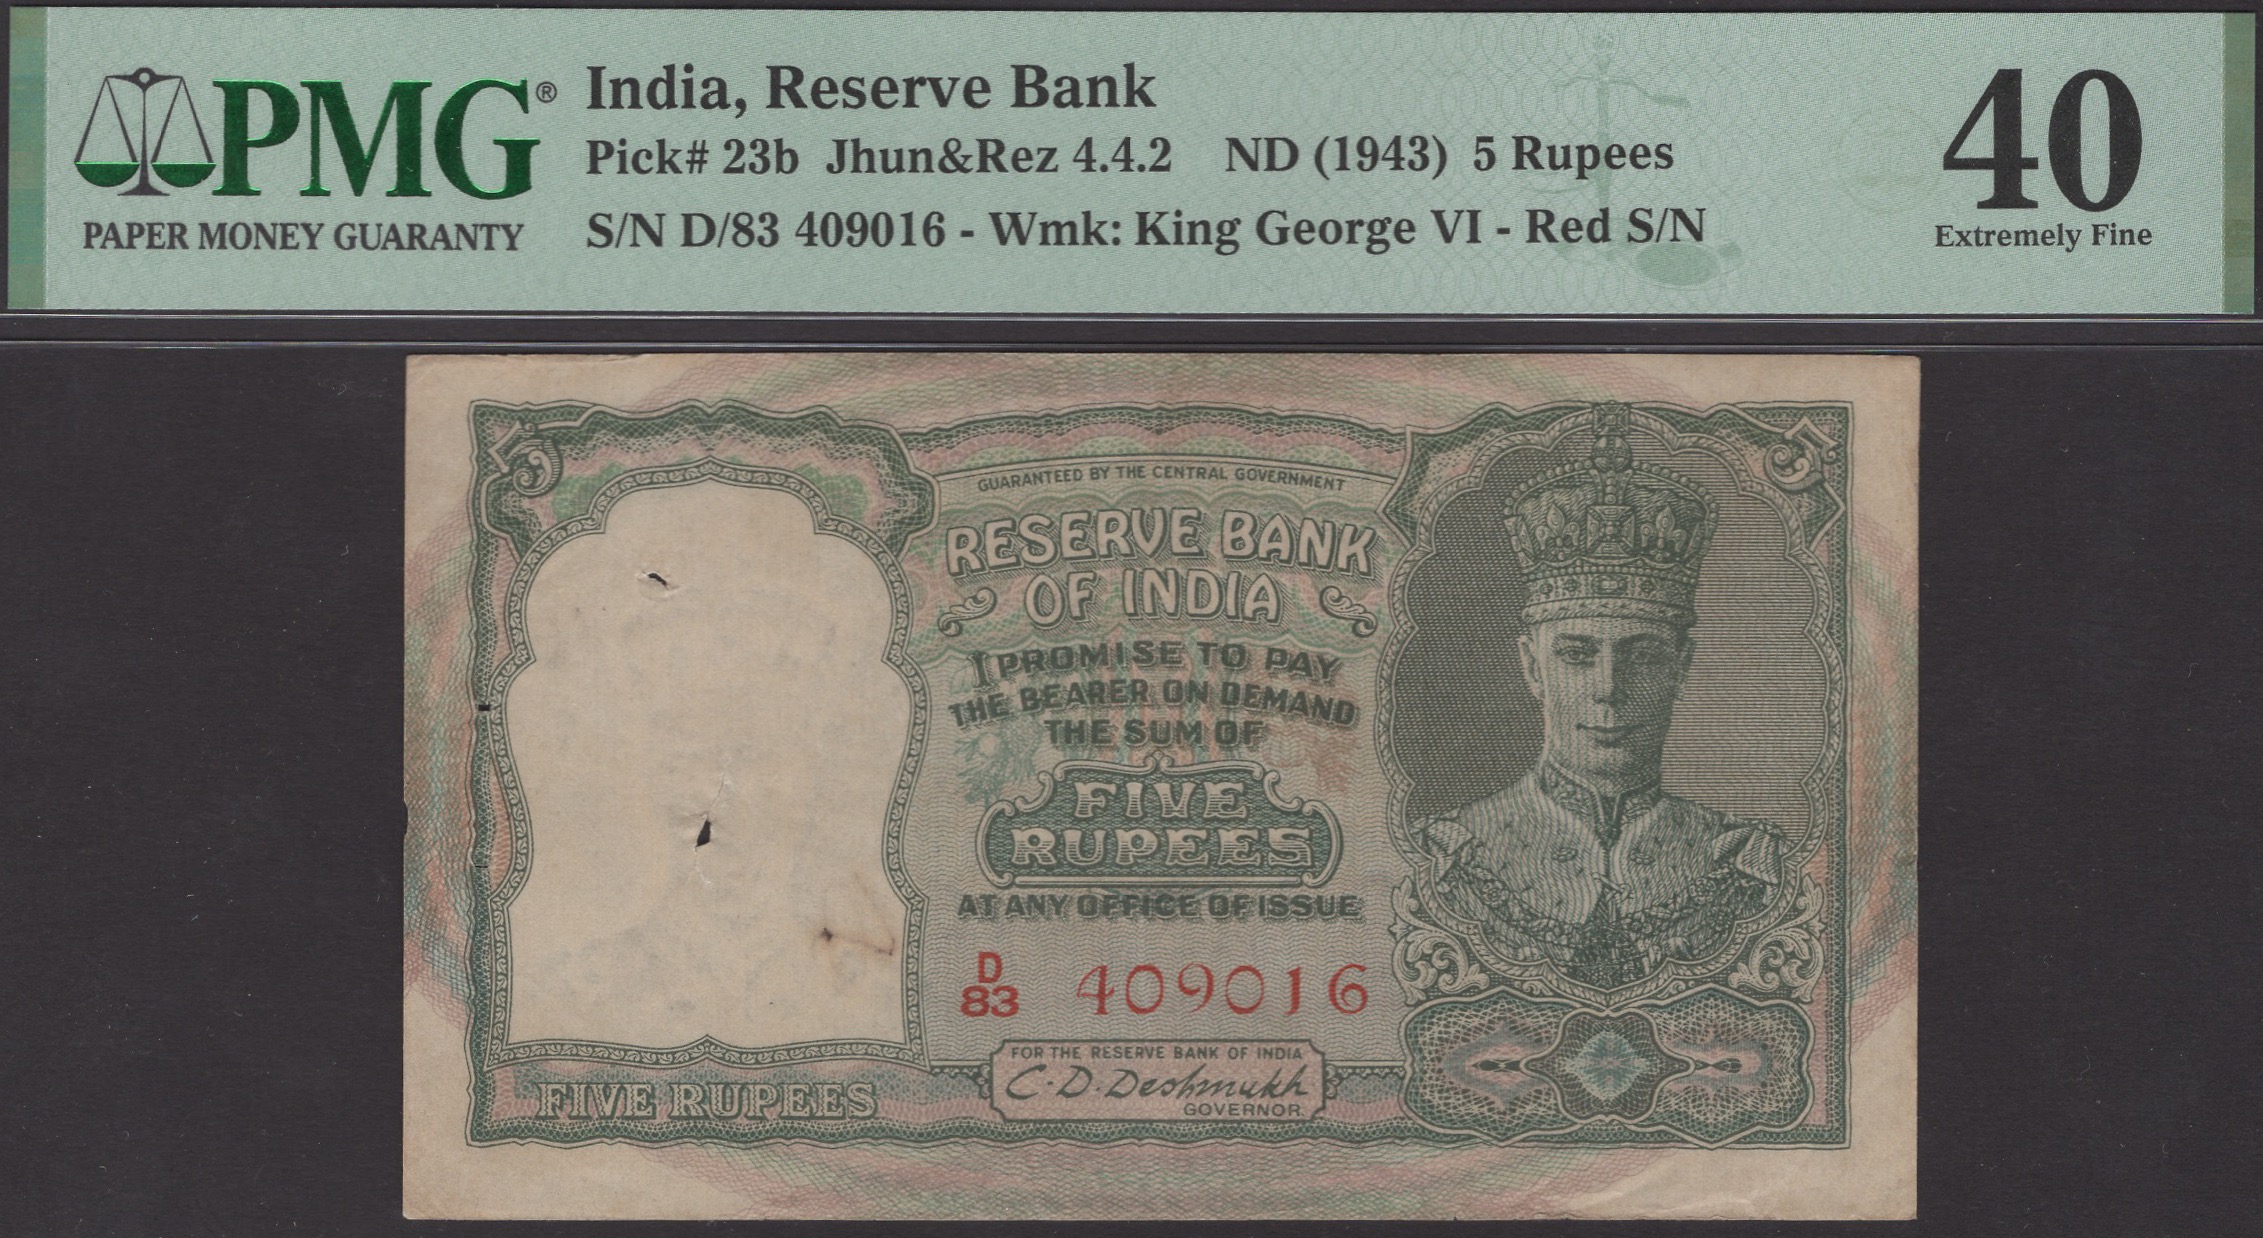 Reserve Bank of India, 5 Rupees, ND (1943), red serial number D/83 409016, Deshmukh...